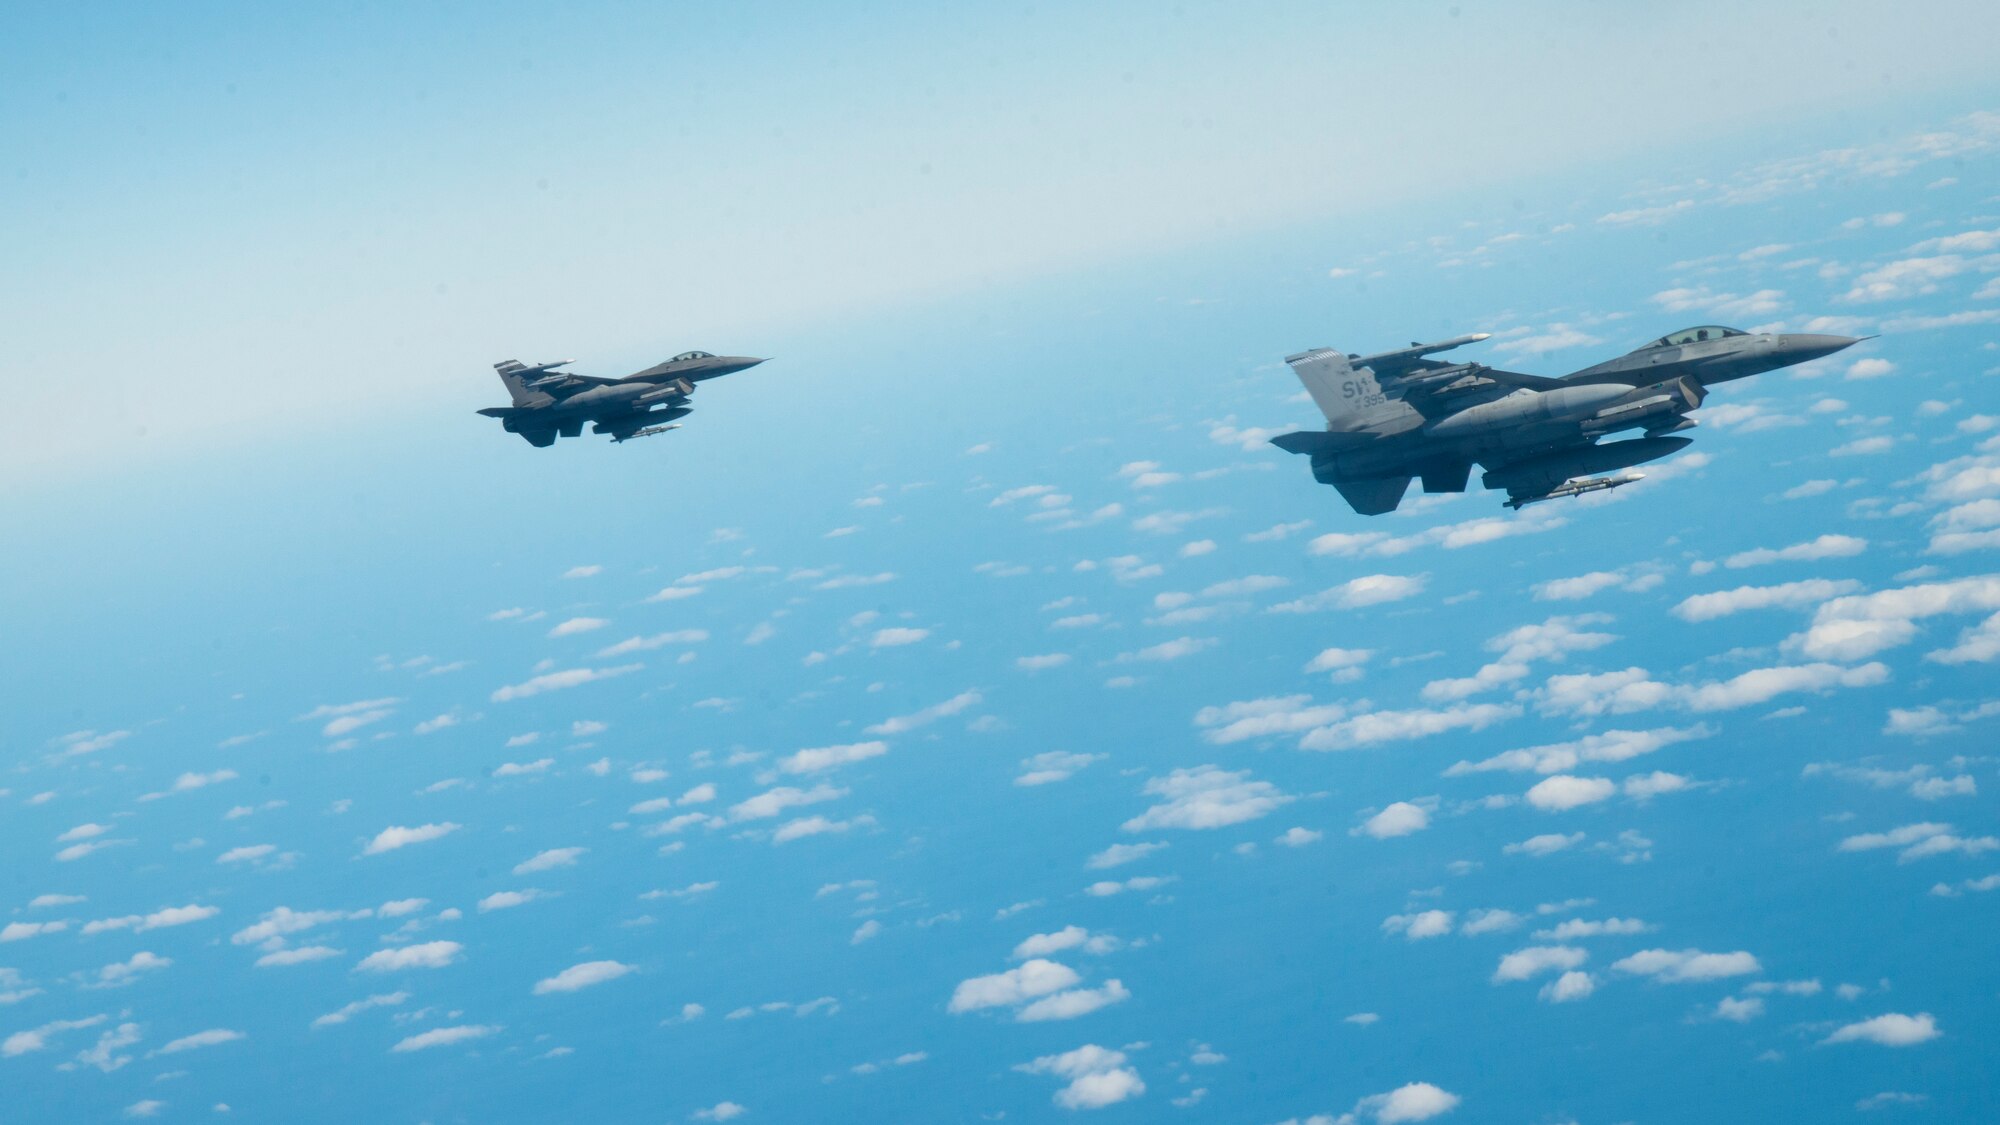 F-16 Fighting Falcon aircraft assigned to Shaw Air Force Base (AFB), South Carolina, fly in formation to receive air refueling support from a KC-135 Stratotanker aircraft assigned to MacDill AFB, Florida, Dec. 2, 2020.